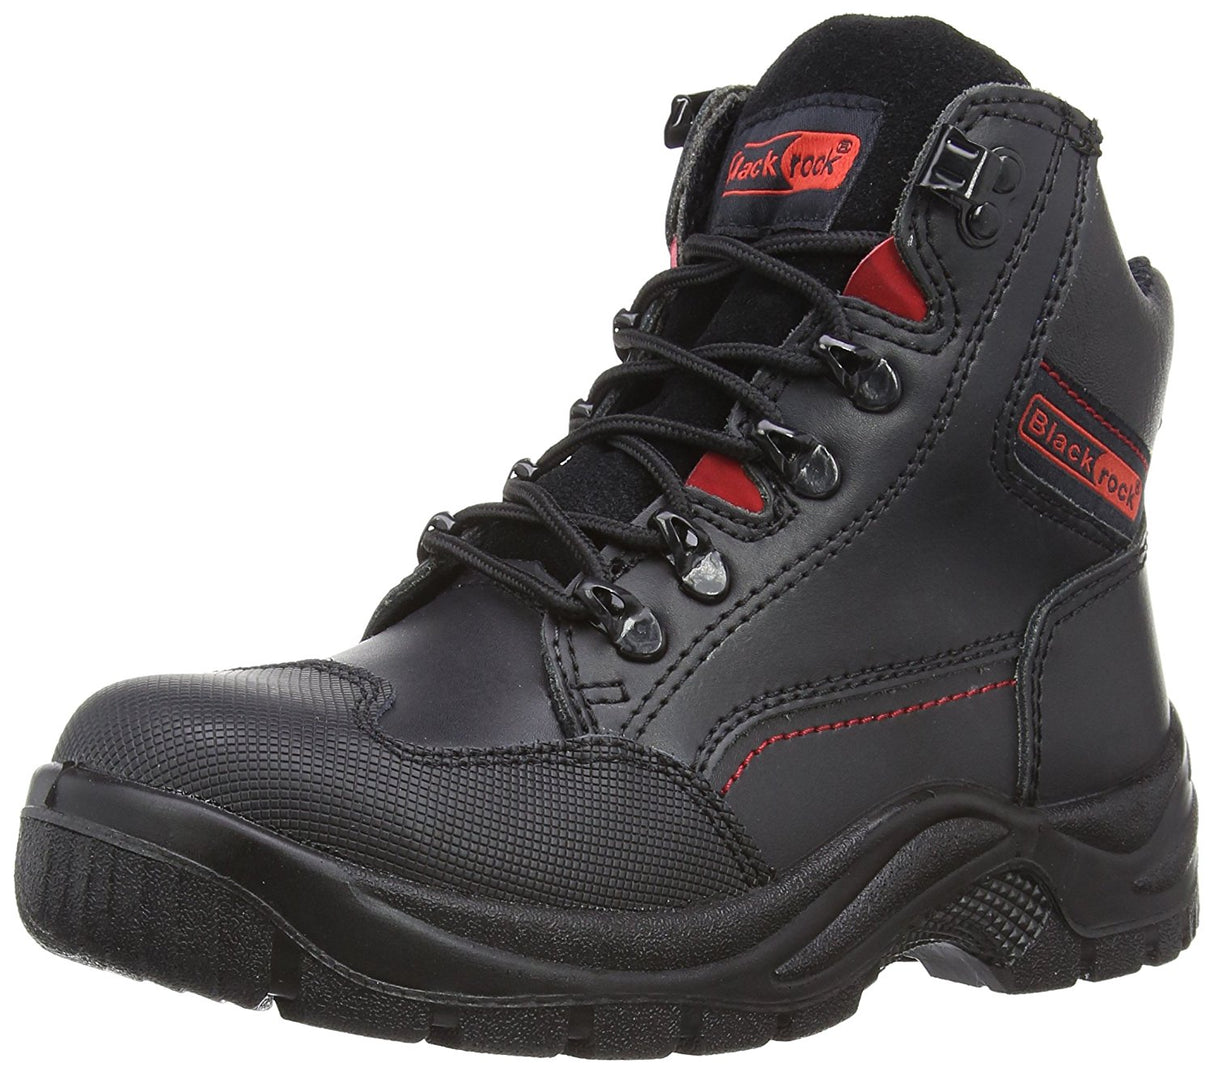 Blackrock SF42 Panther SB-P Water Resistant Leather Safety Boots UK 7-12 Black